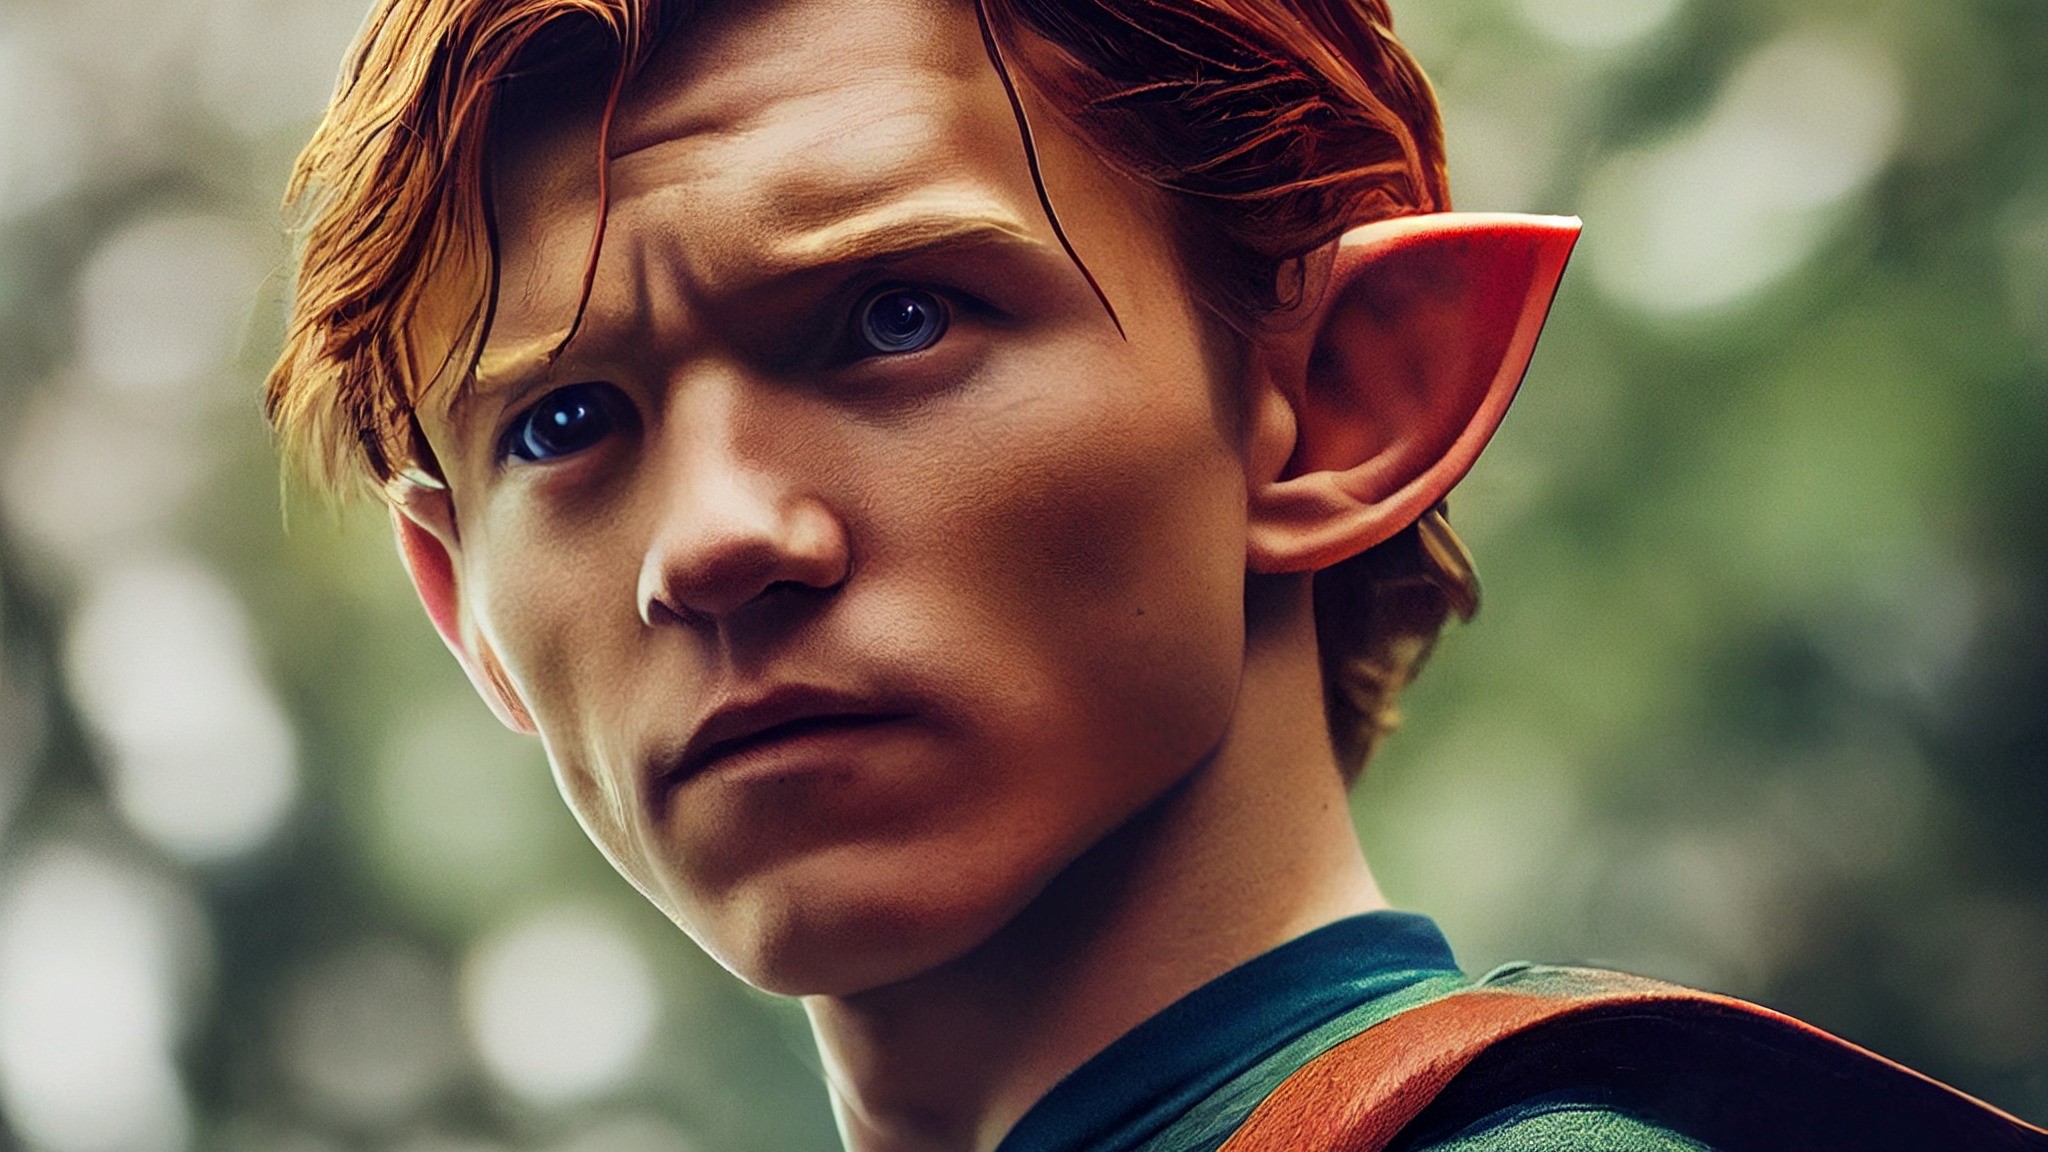 Zelda fans beg Nintendo not to cast Tom Holland as Link in new movie